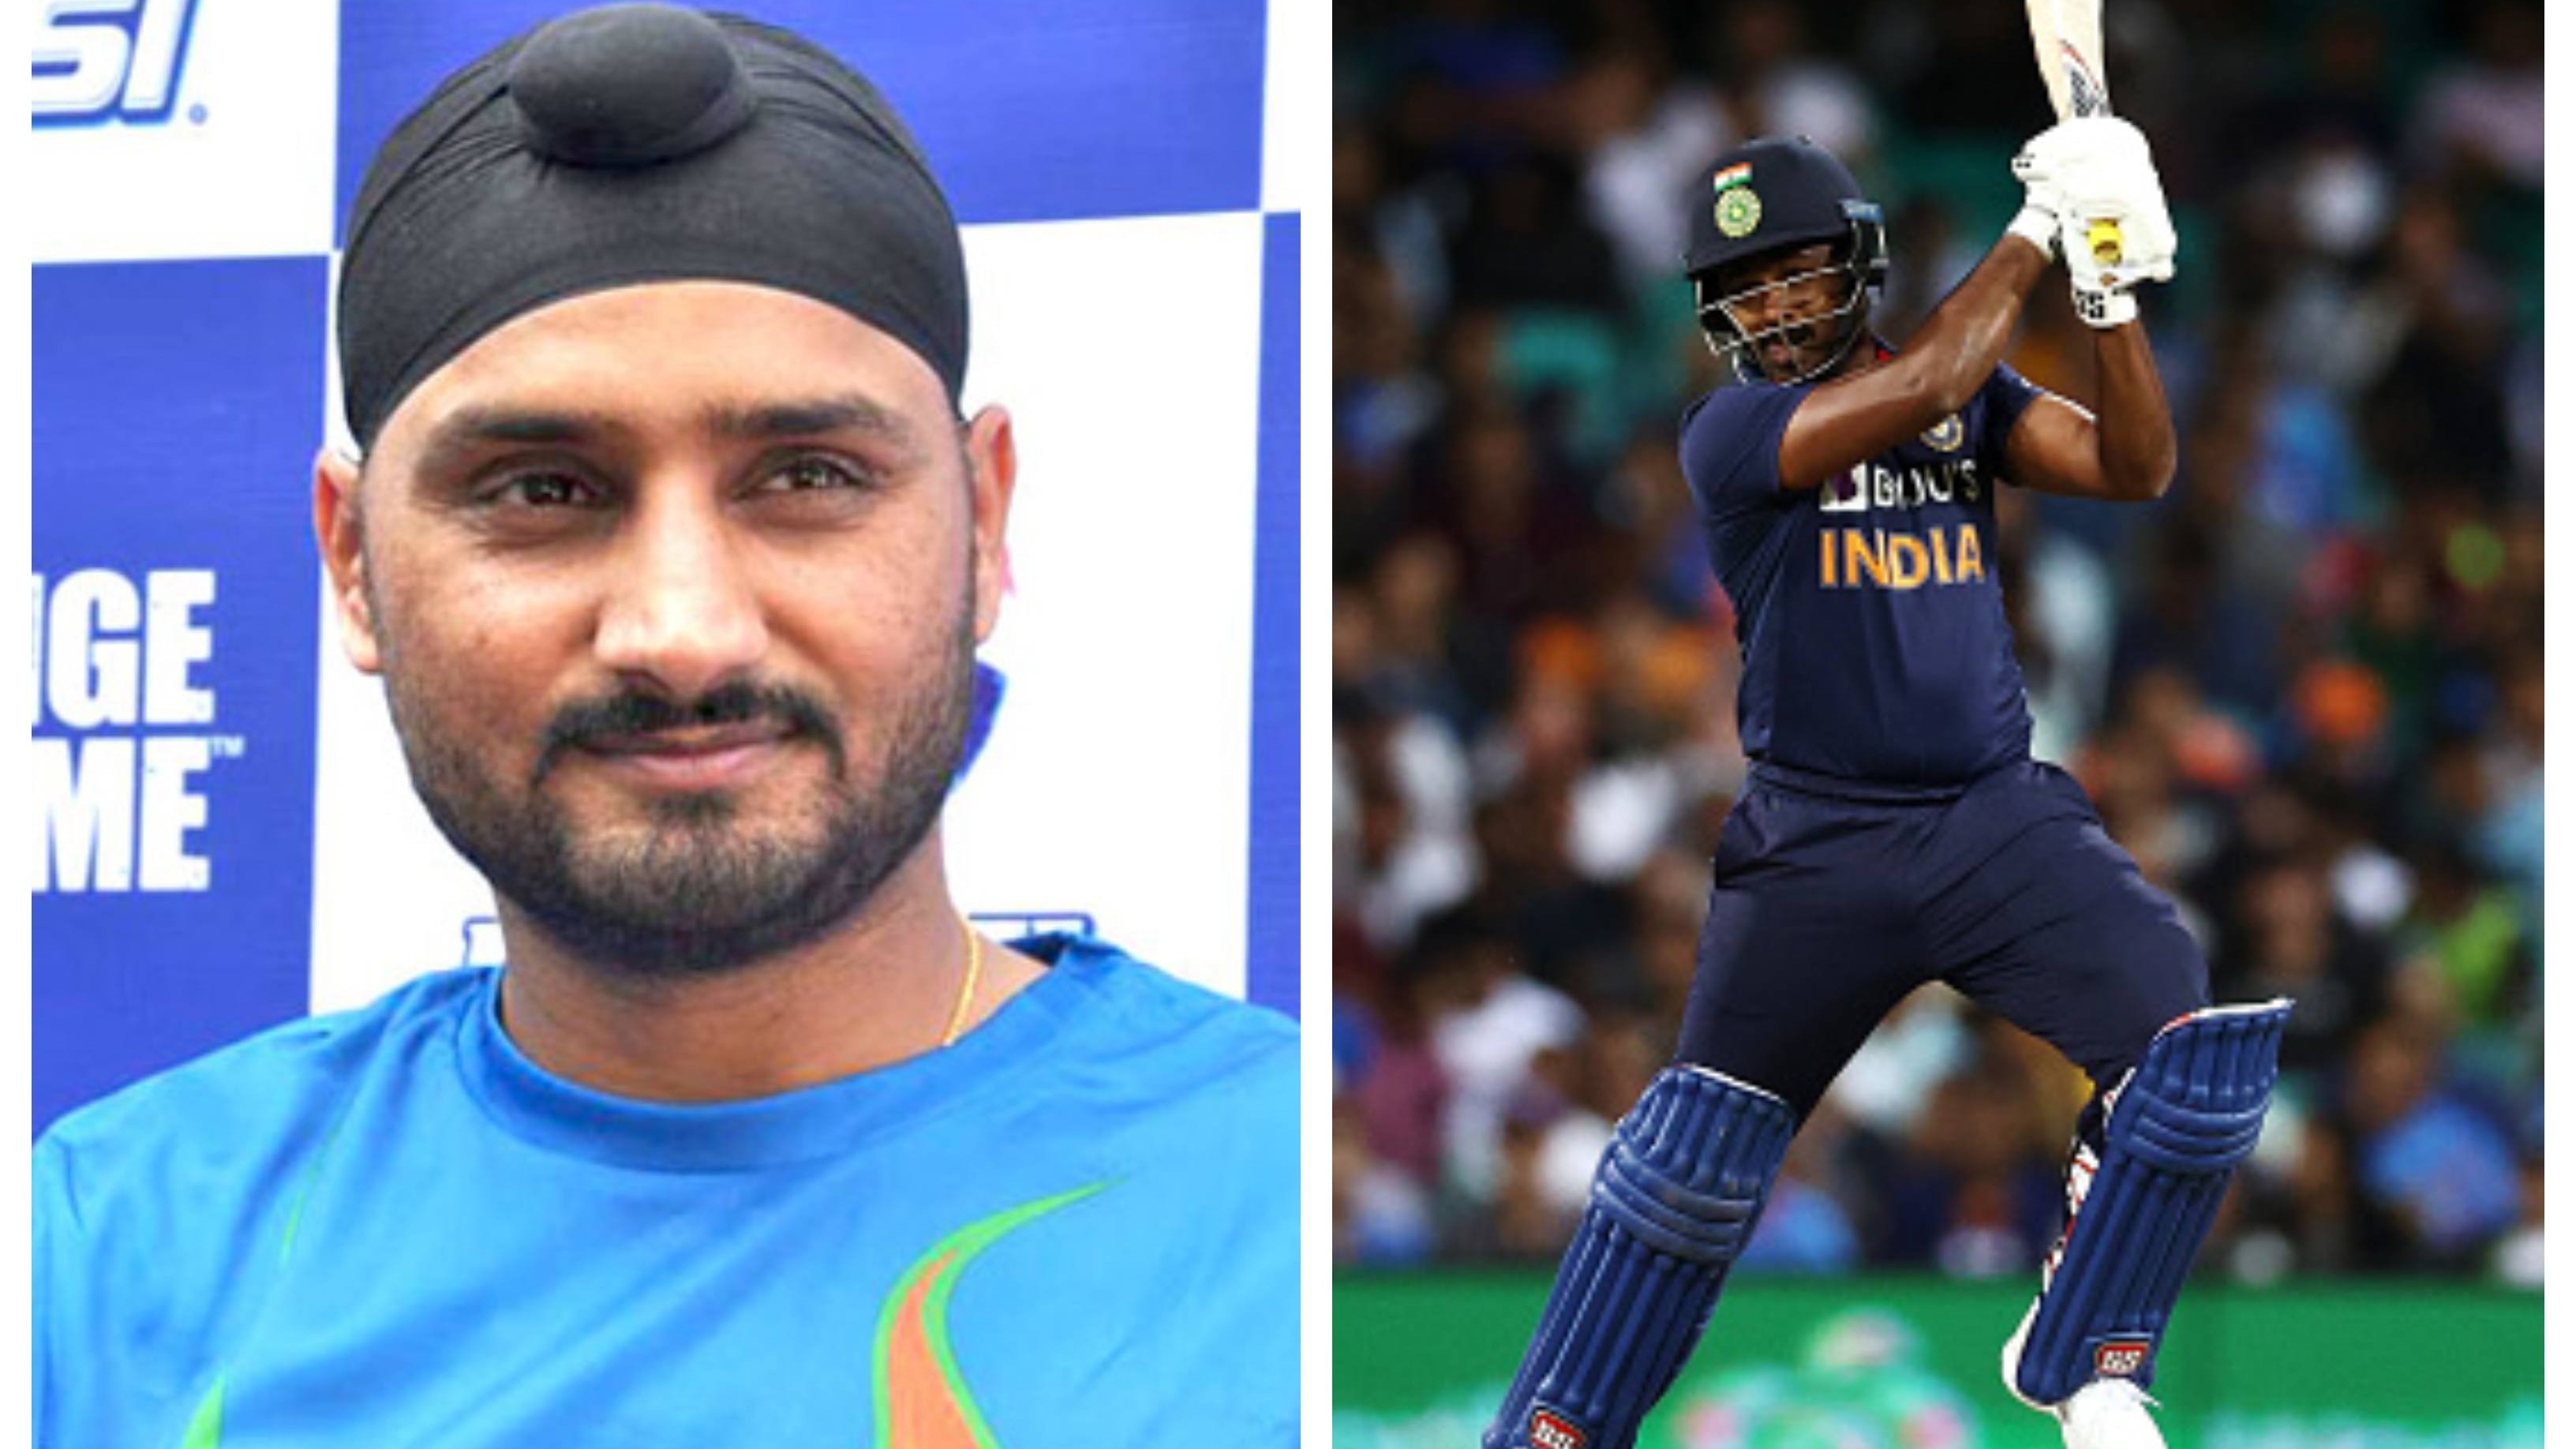 AUS v IND 2020-21: Harbhajan Singh advises Sanju Samson to learn from mistakes and grab opportunities